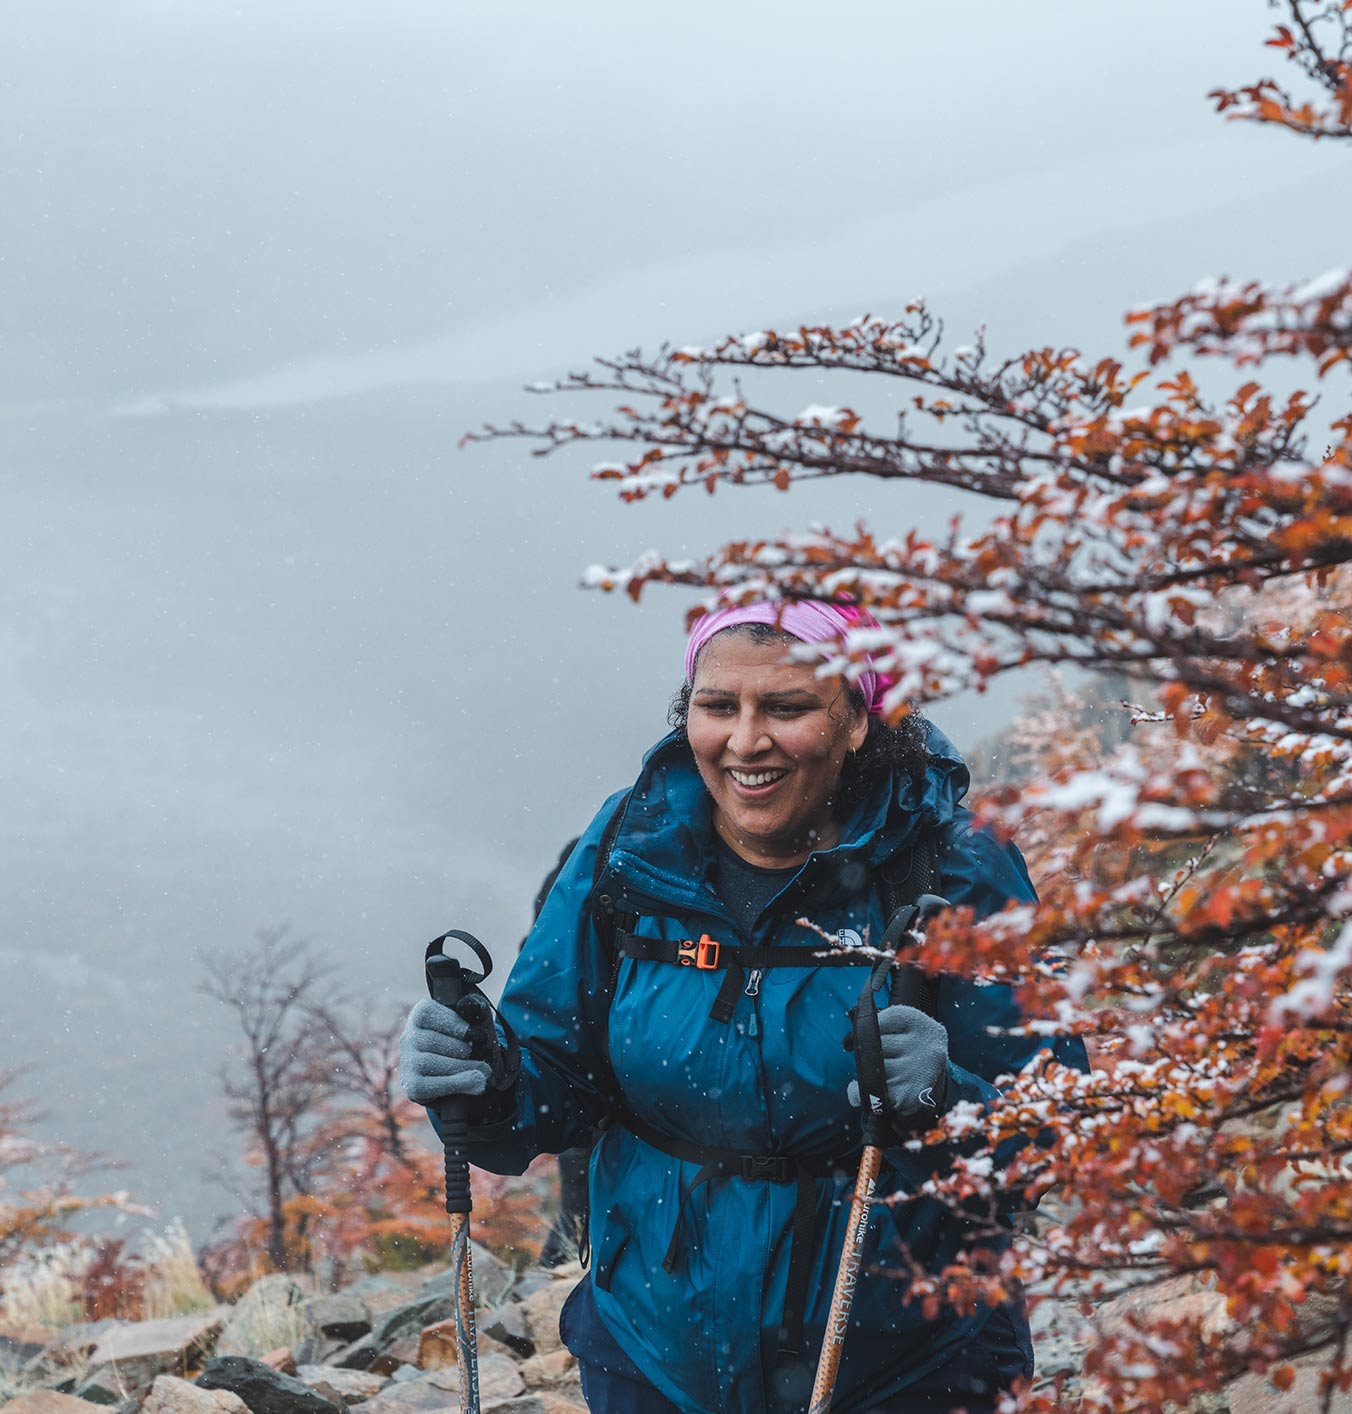 Solo hiking: Everything you need to know